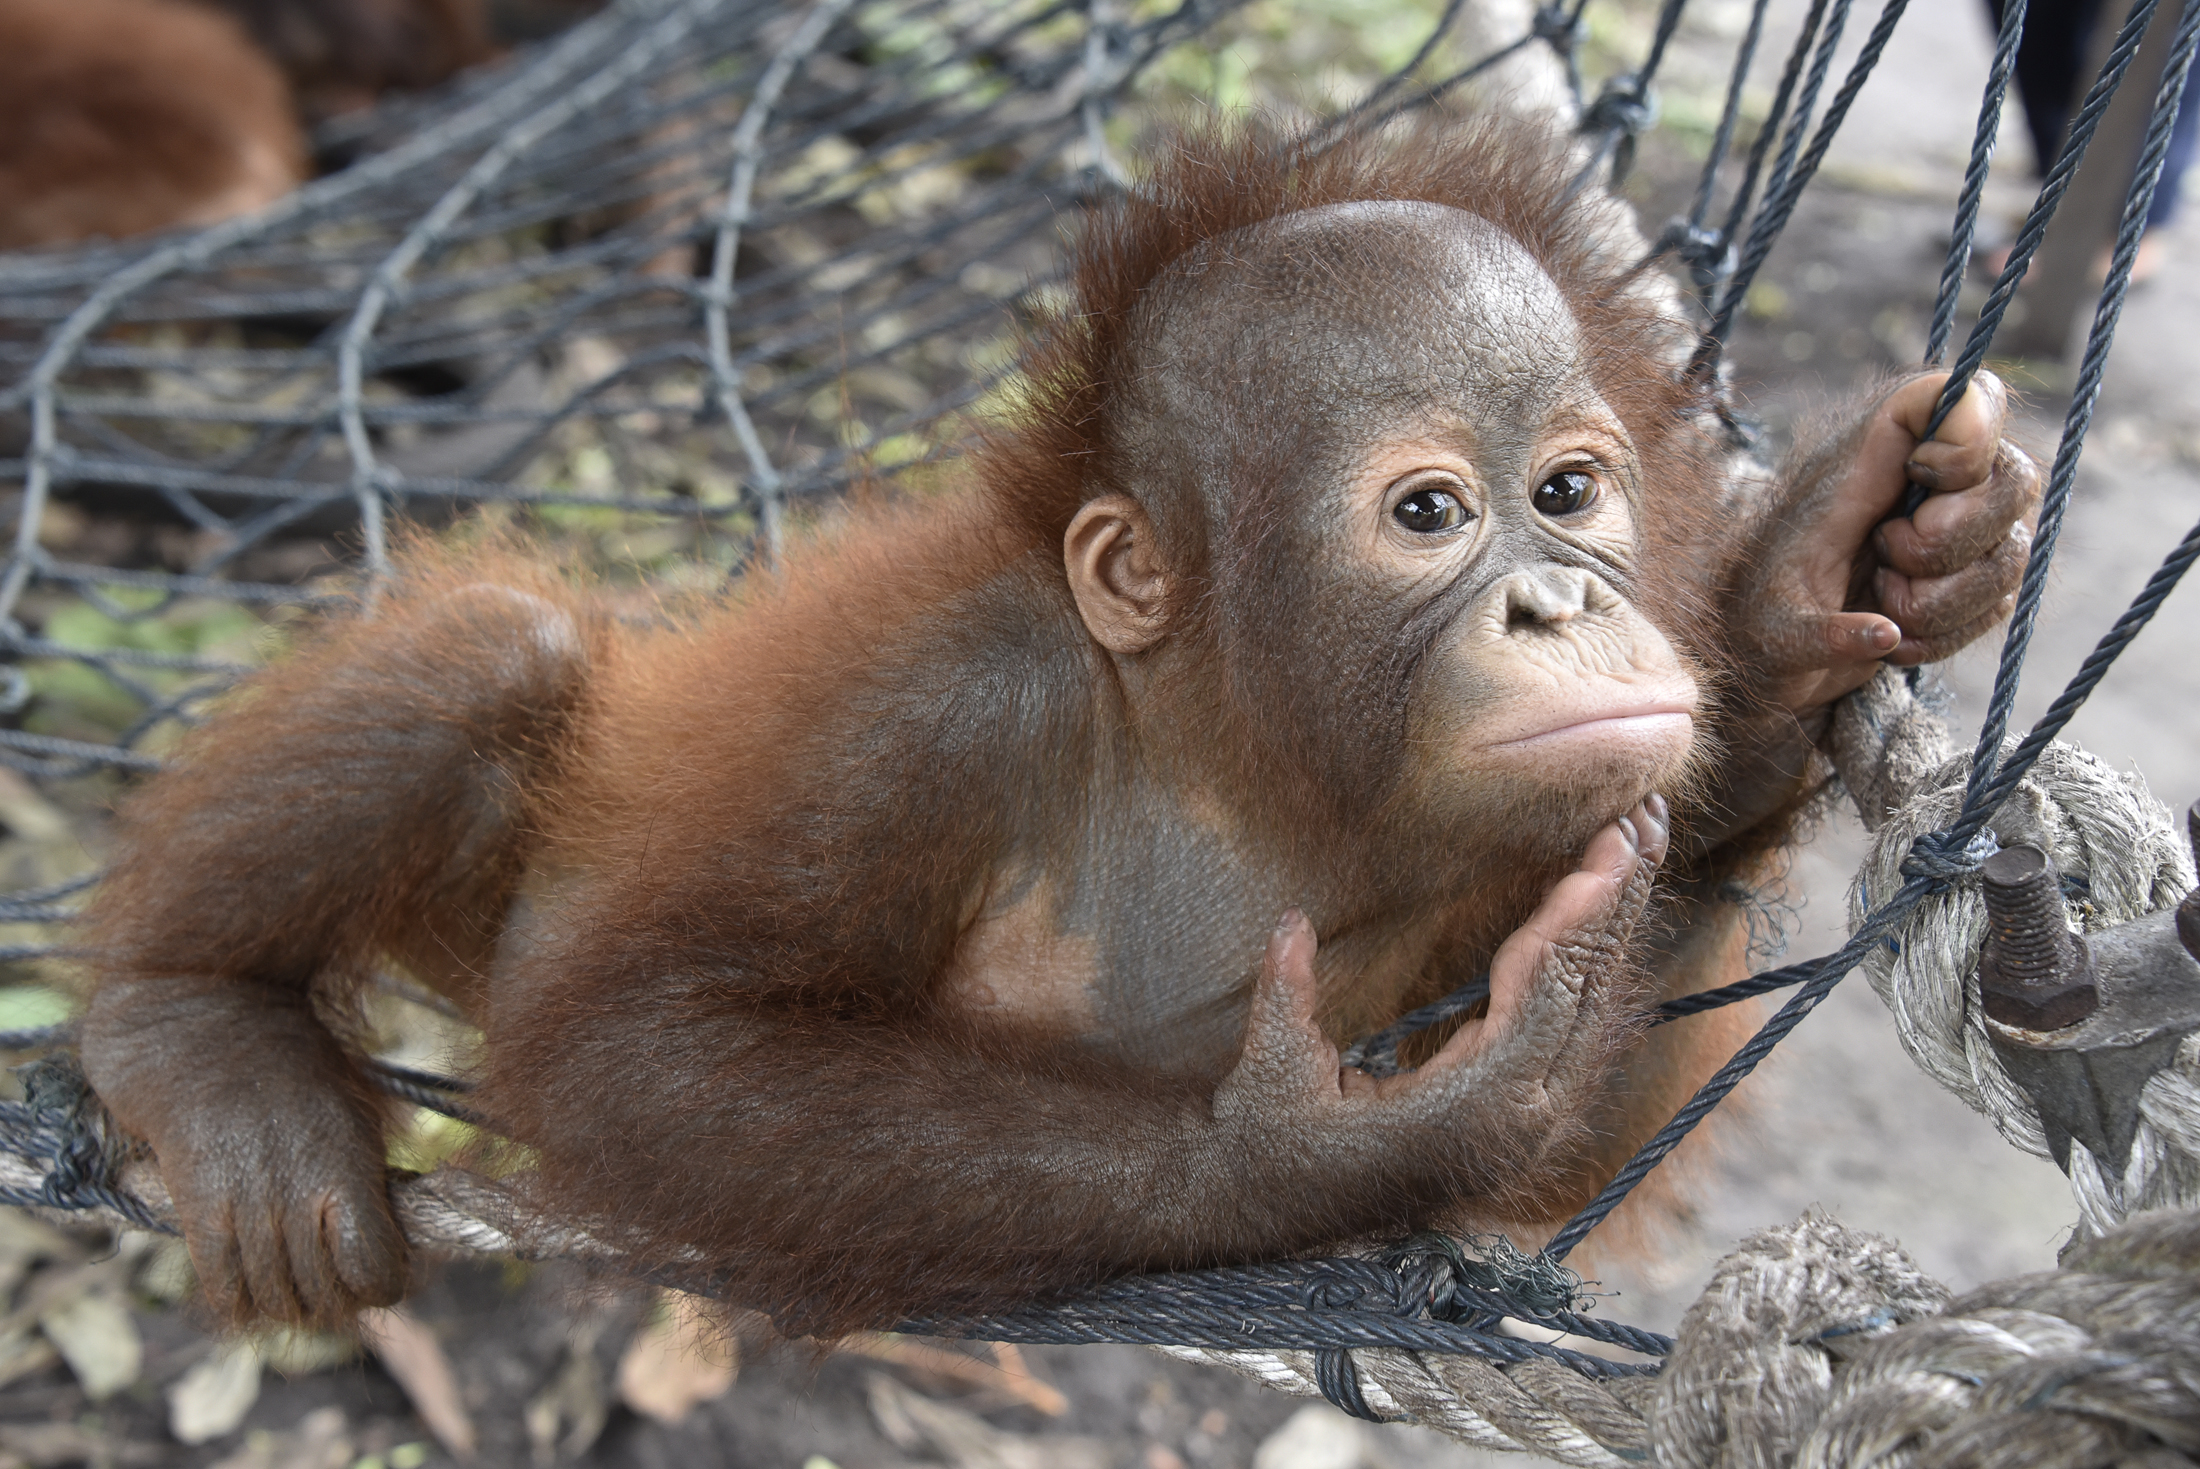 A special opportunity to visit the orangutans of Borneo  